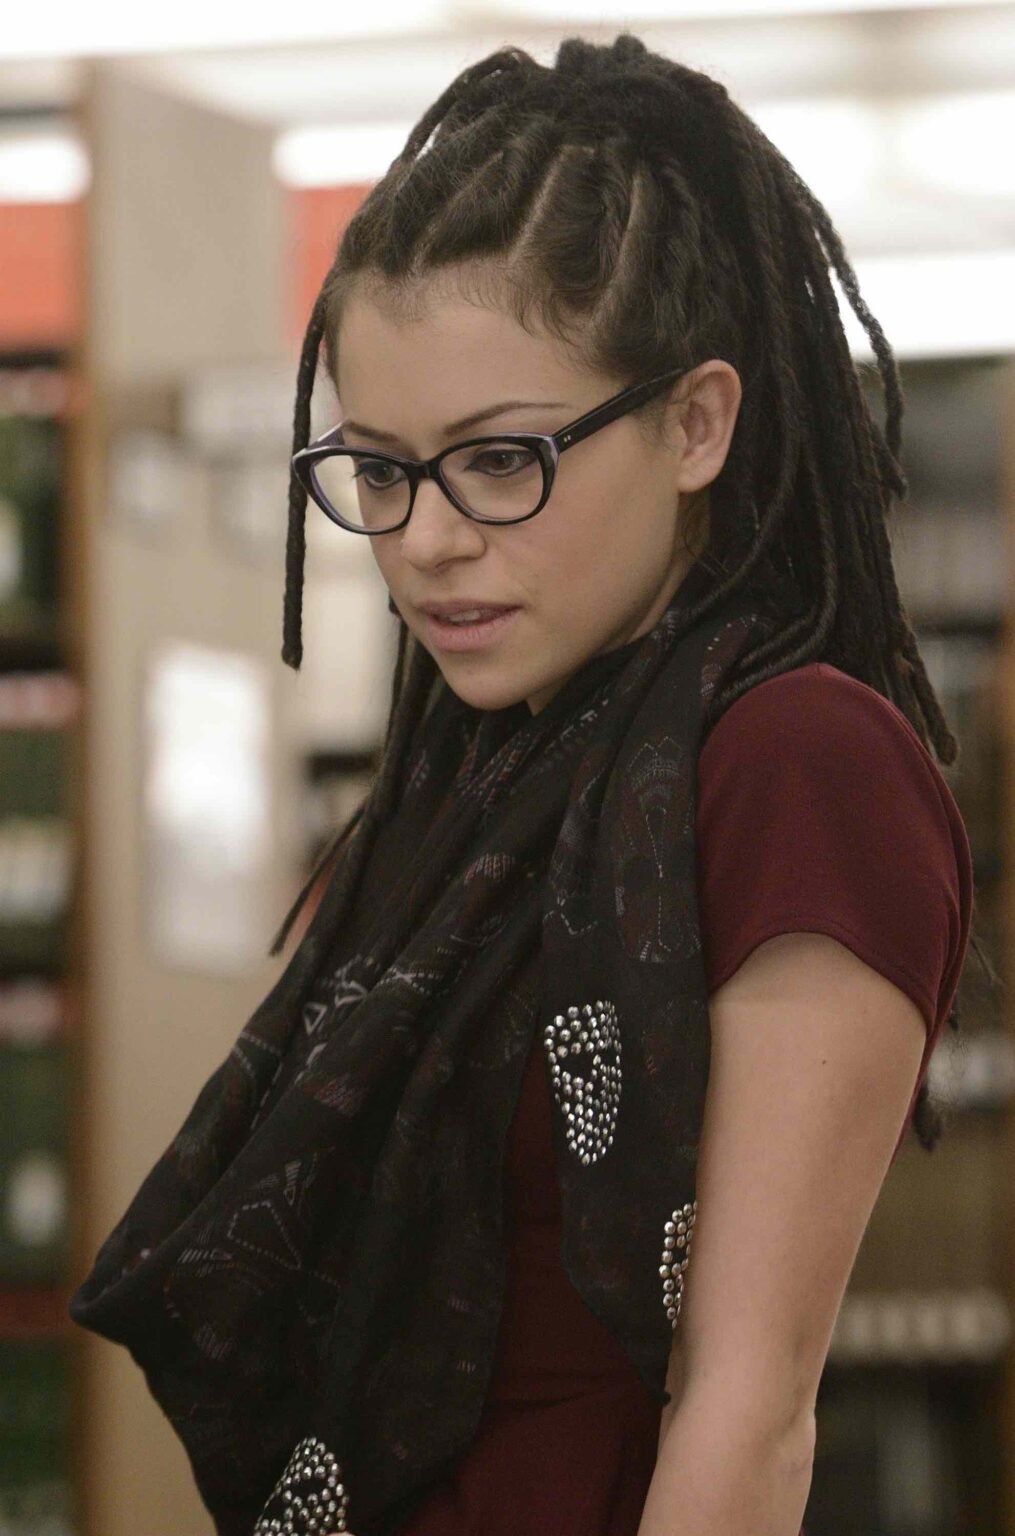 Canadian actress Tatiana Maslany took the world by storm with her multiple performances in 'Orphan Black'. Here's more about Maslany.